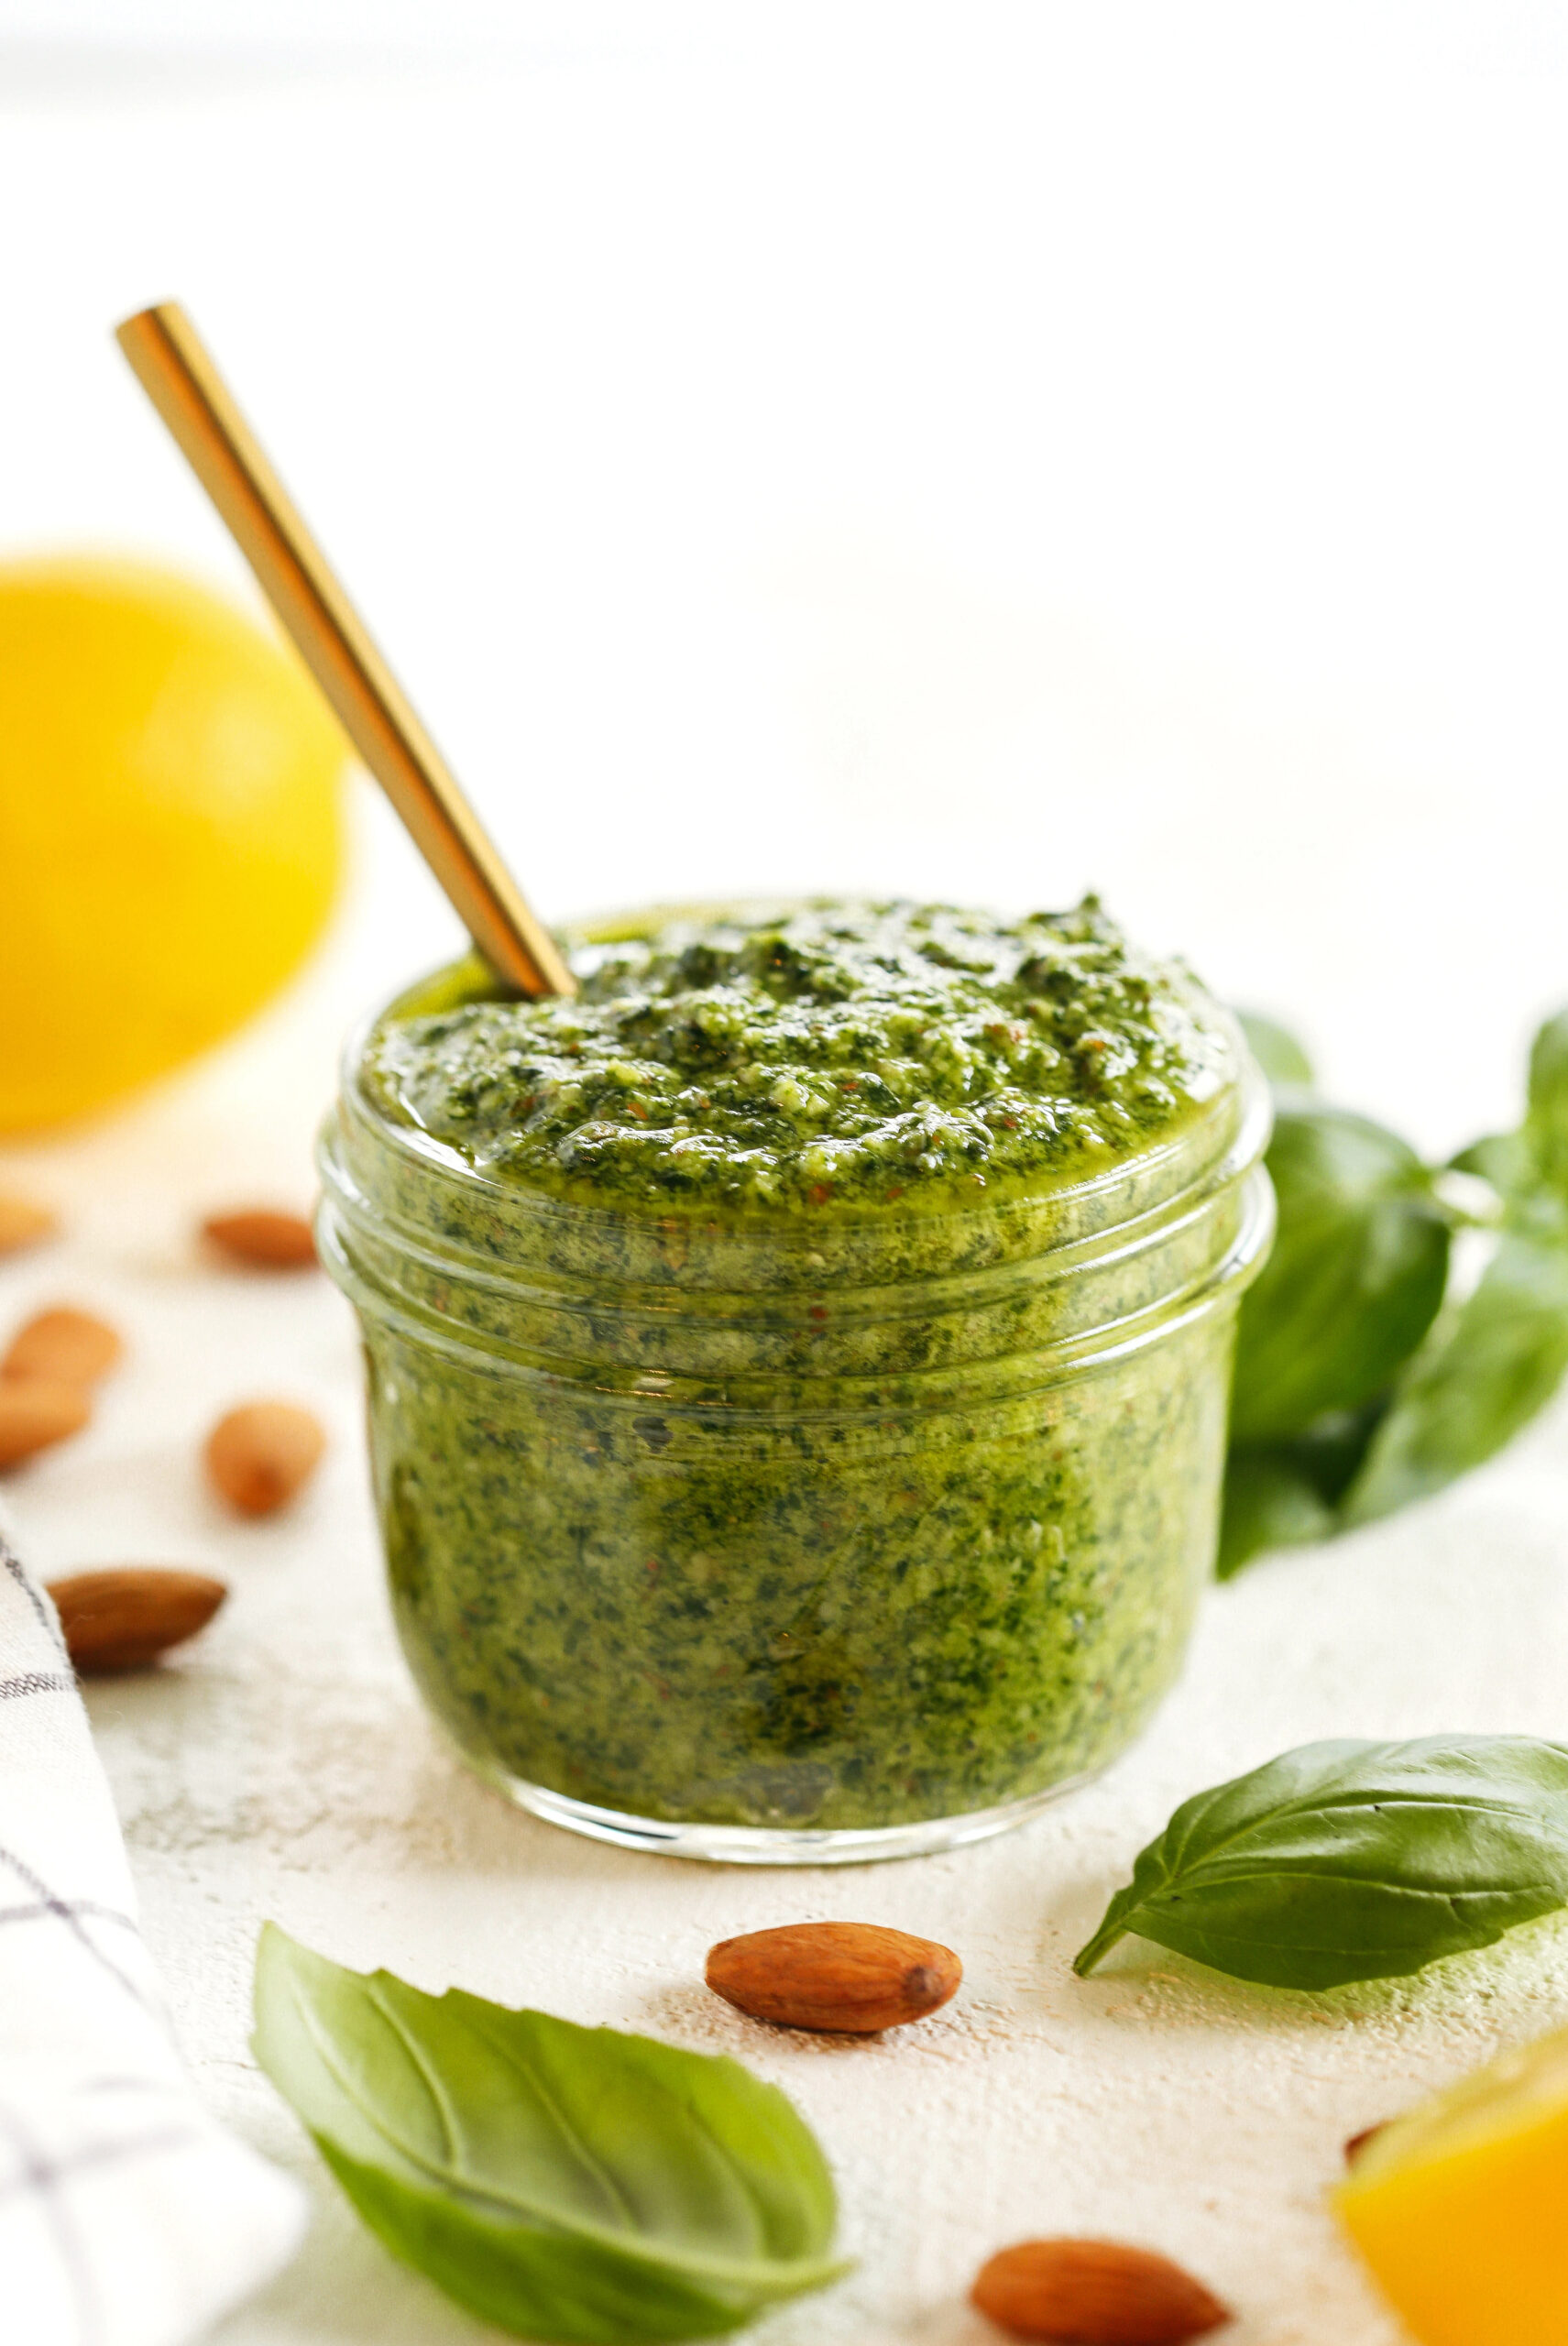 This Simple Basil Almond Pesto recipe combines fresh, delicious ingredients that is easily made in just 10 minutes!  So versatile and perfect with pizza, pasta, chicken, shrimp or veggies!